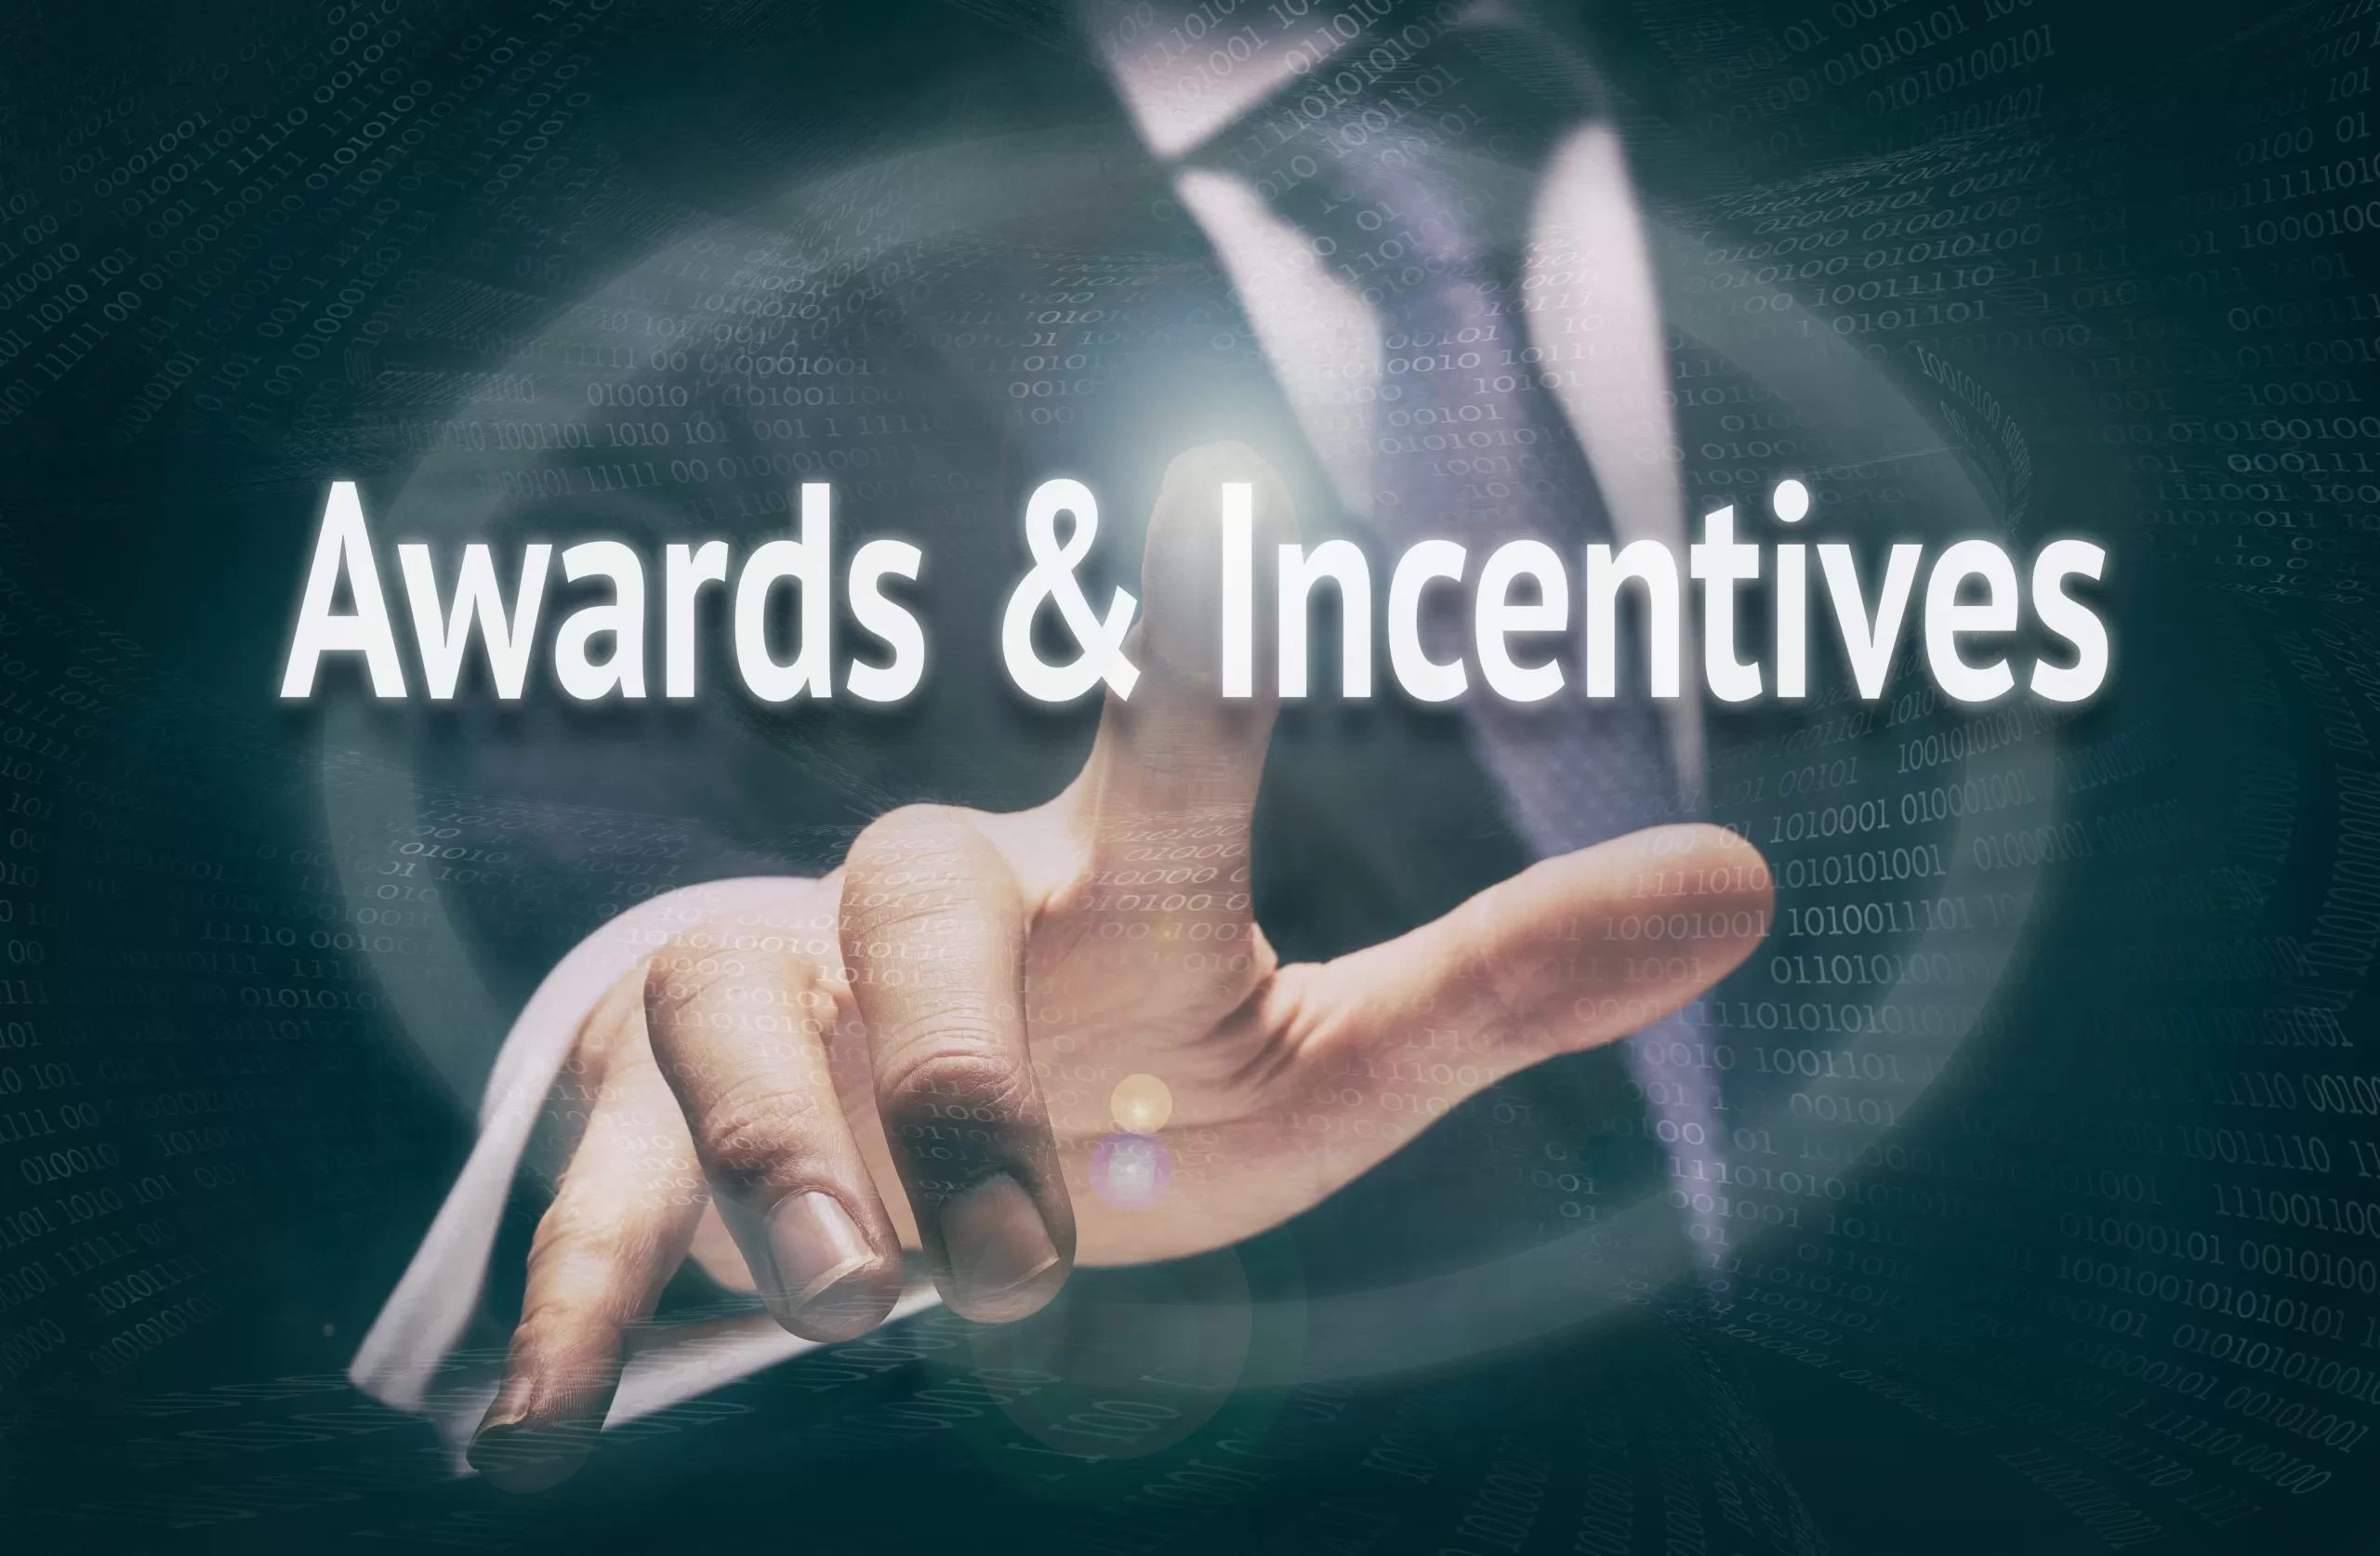 Creating Employee Incentive Programs